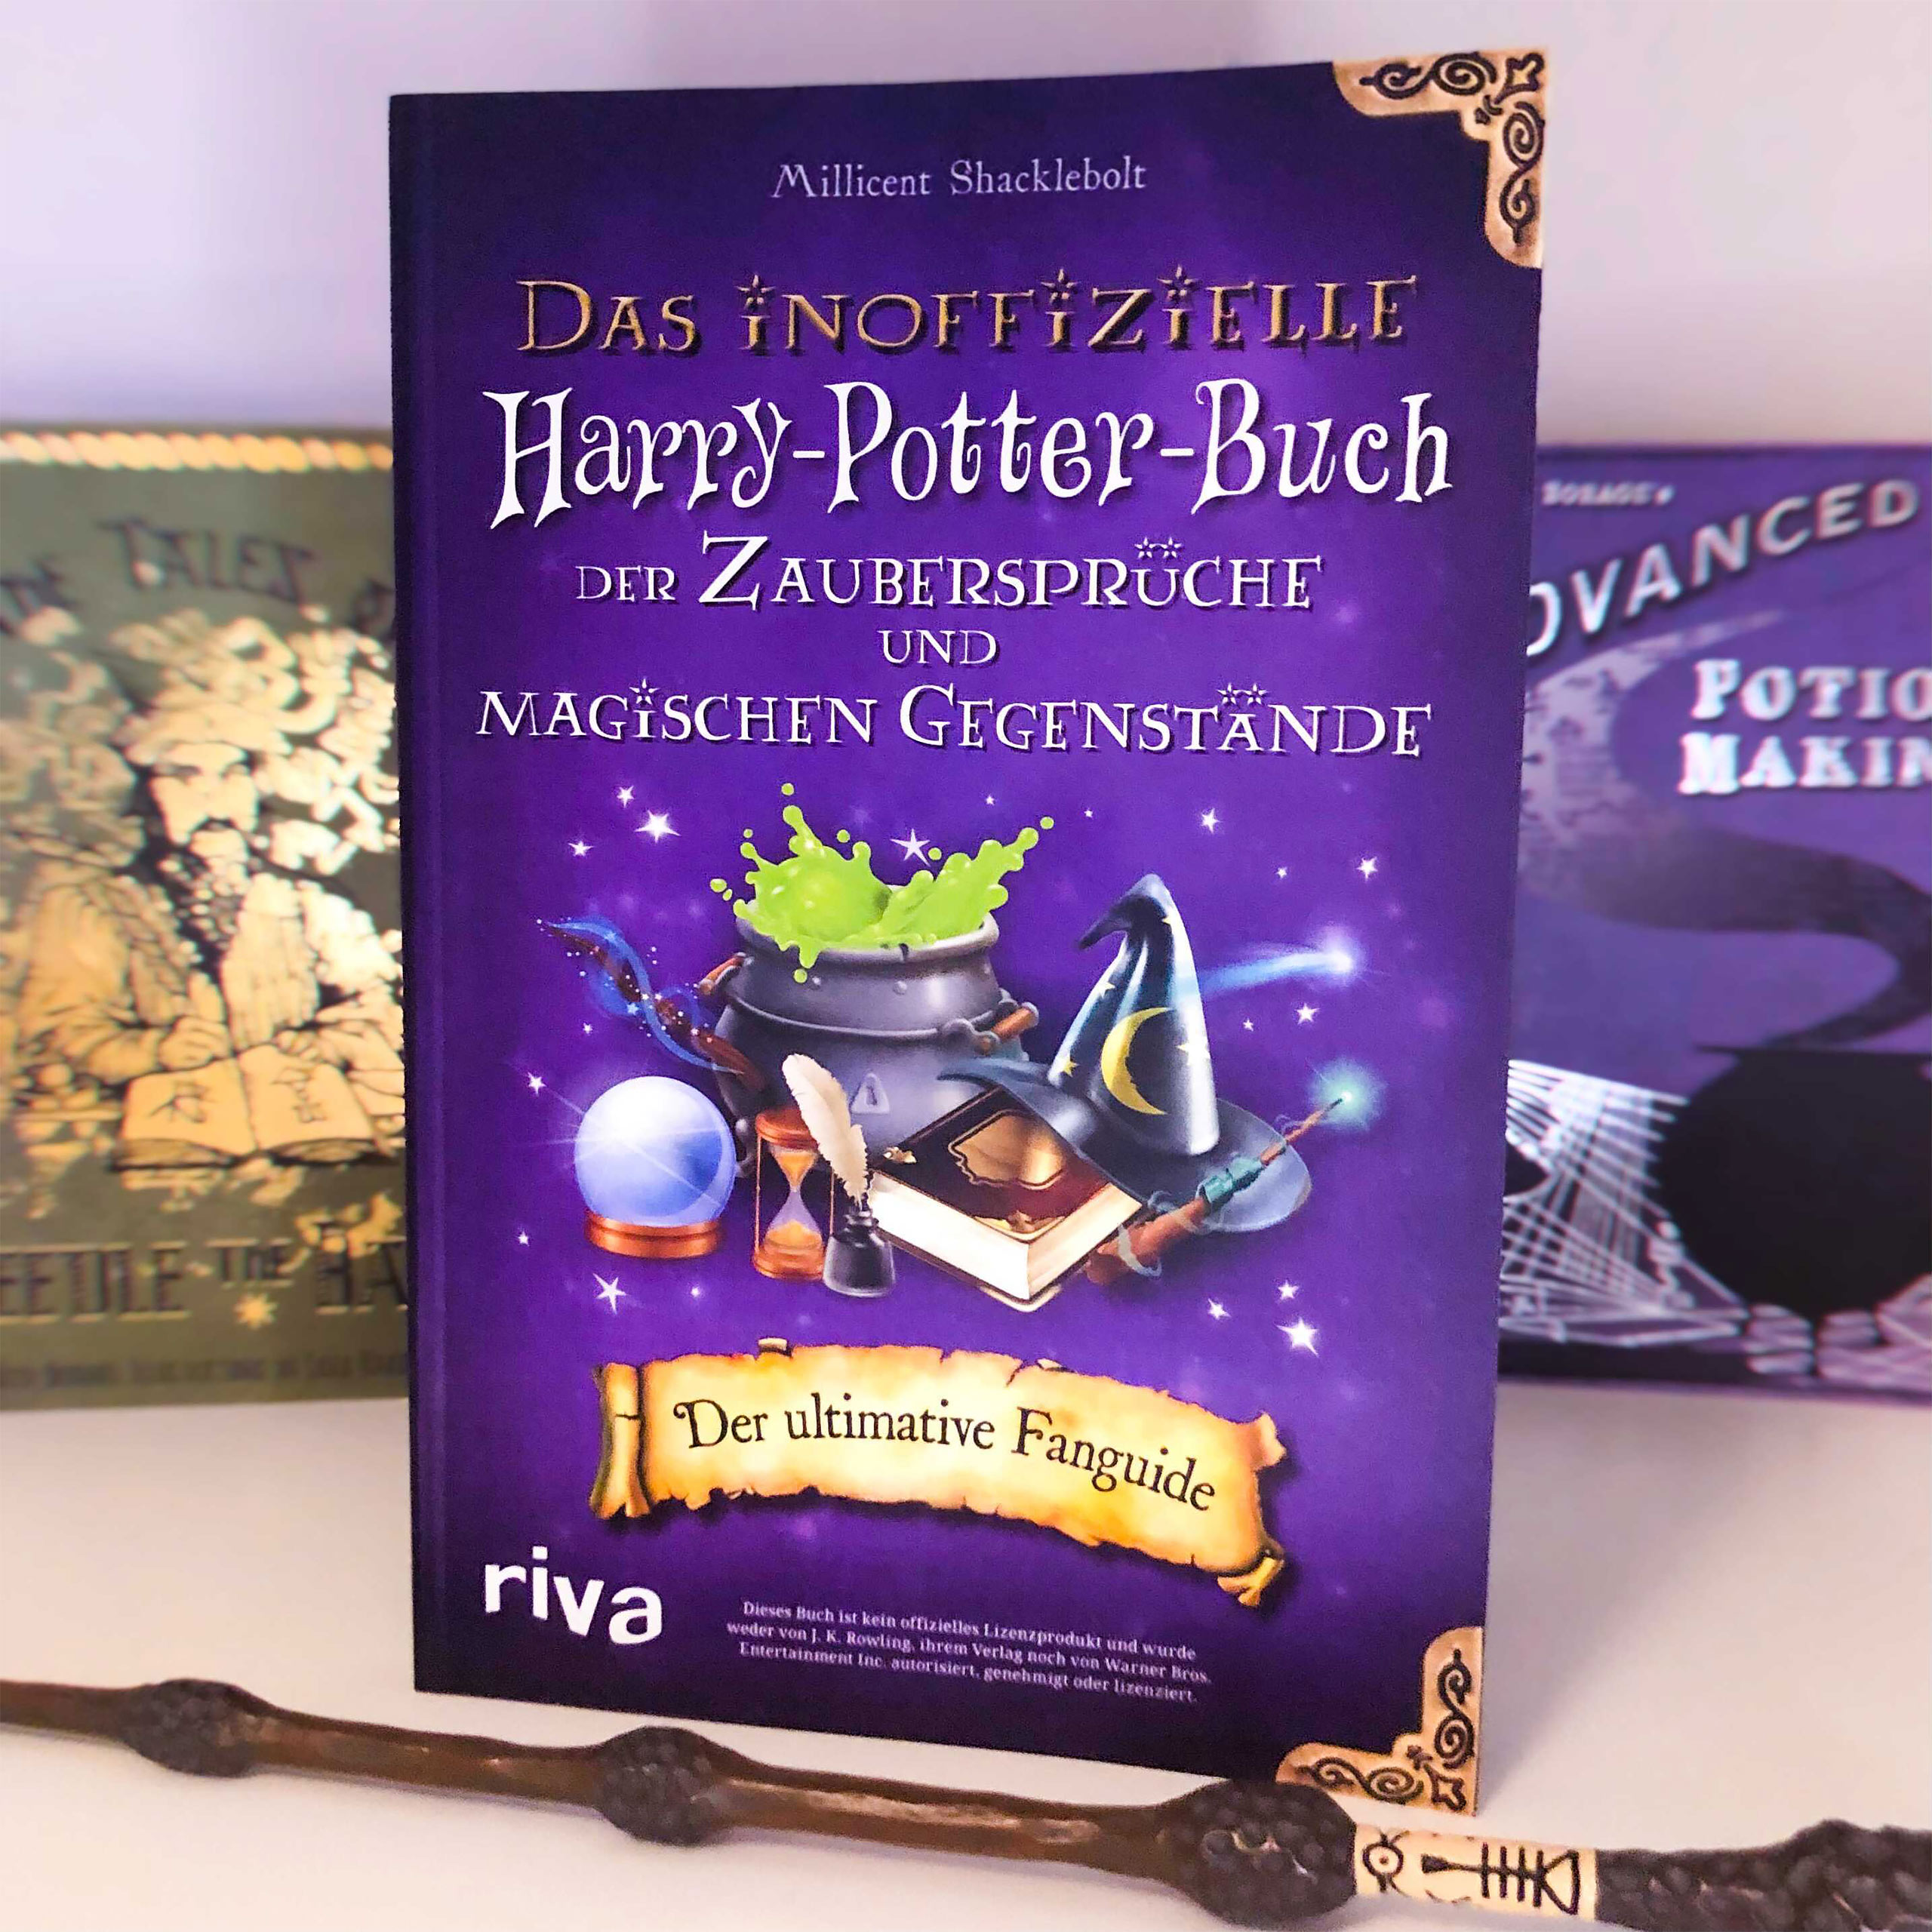 The unofficial Harry Potter book of spells and magical items